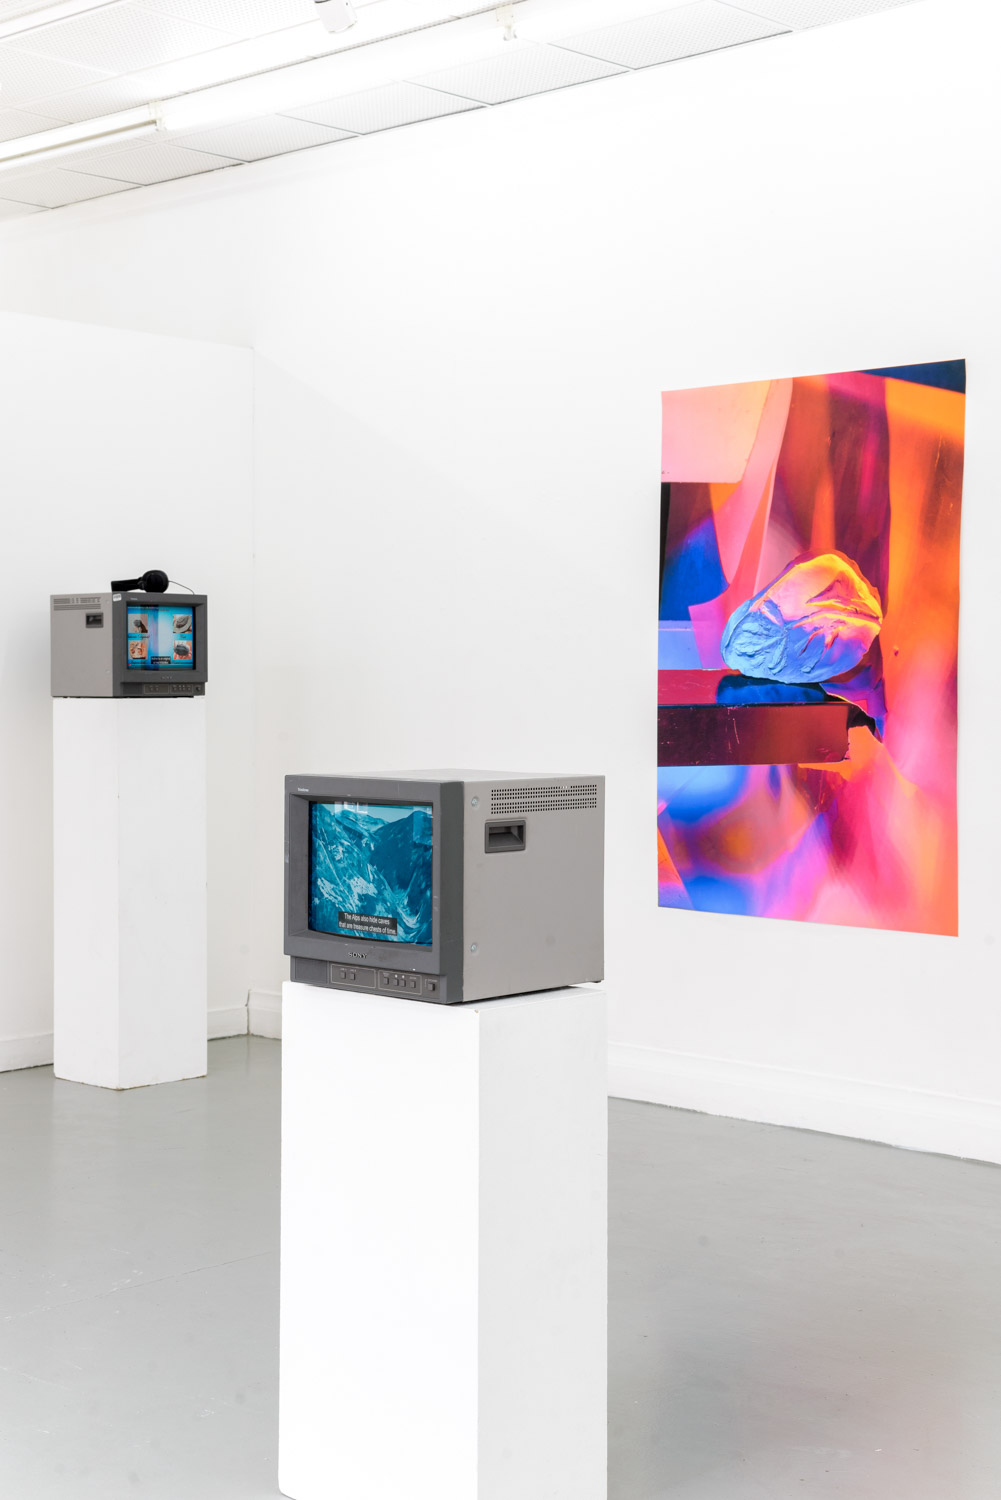 contemporary art installation in a white gallery with monitors on podiums and a frame on the wall by artist Stefano Conti